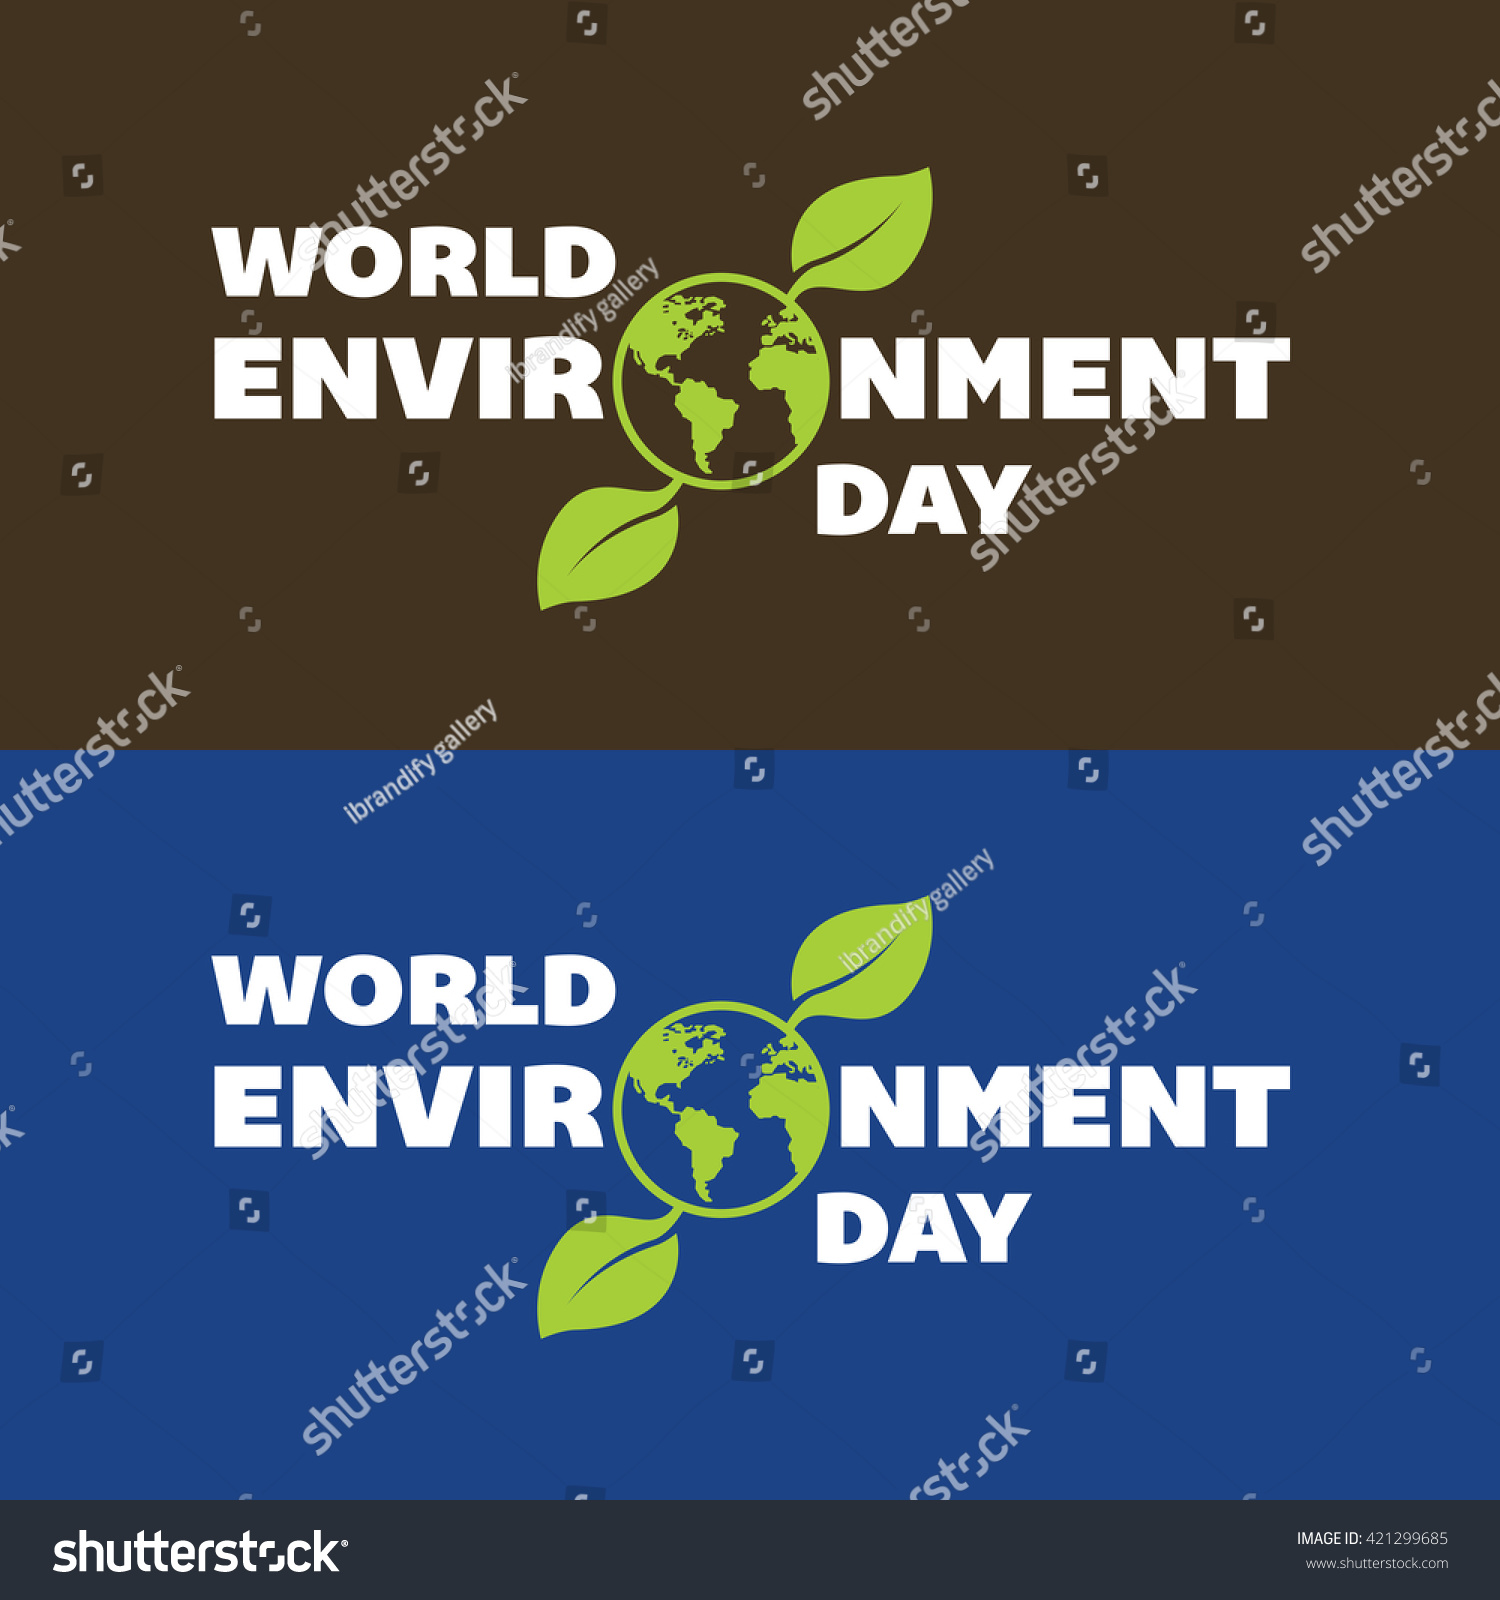 World Environment Day Blue Brown Banner Stock Vector HD (Royalty ...